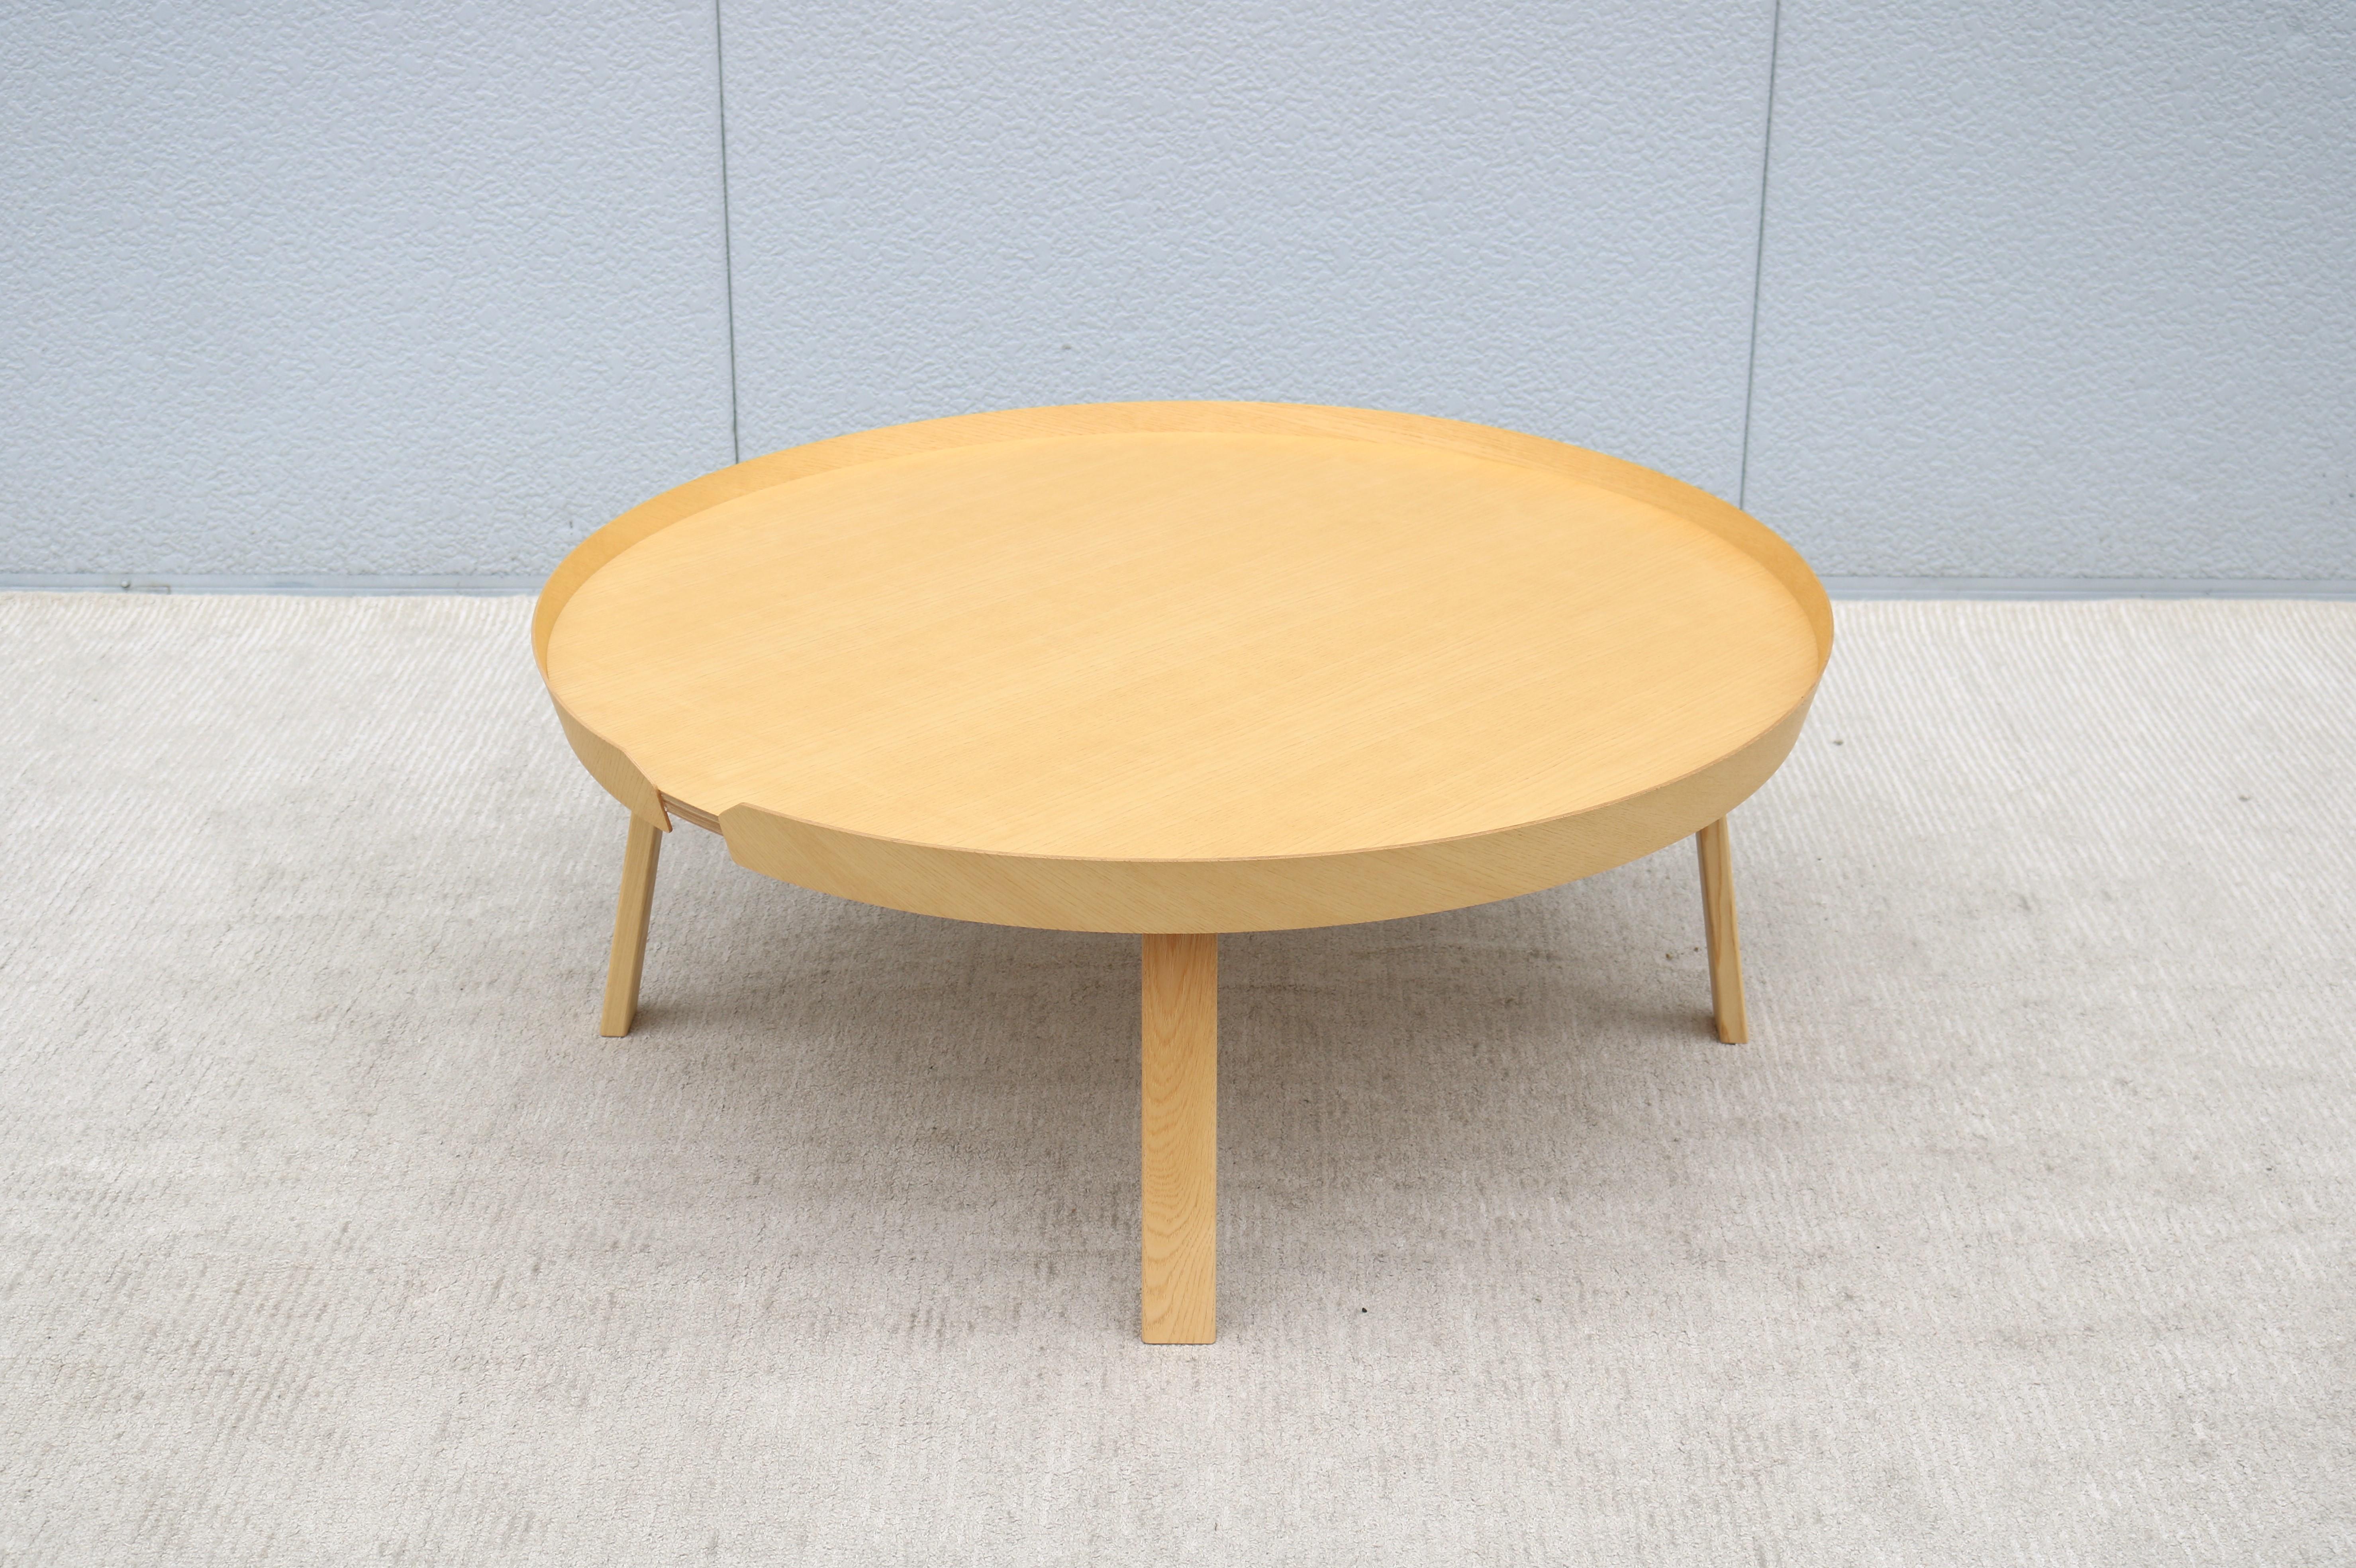 The Around Table by Muuto is an instant classic, It has a modern and unique identity and the material and craftsmanship express distinct Scandinavian references.
This simple and vibrant table brings a new perspective to its typology through the